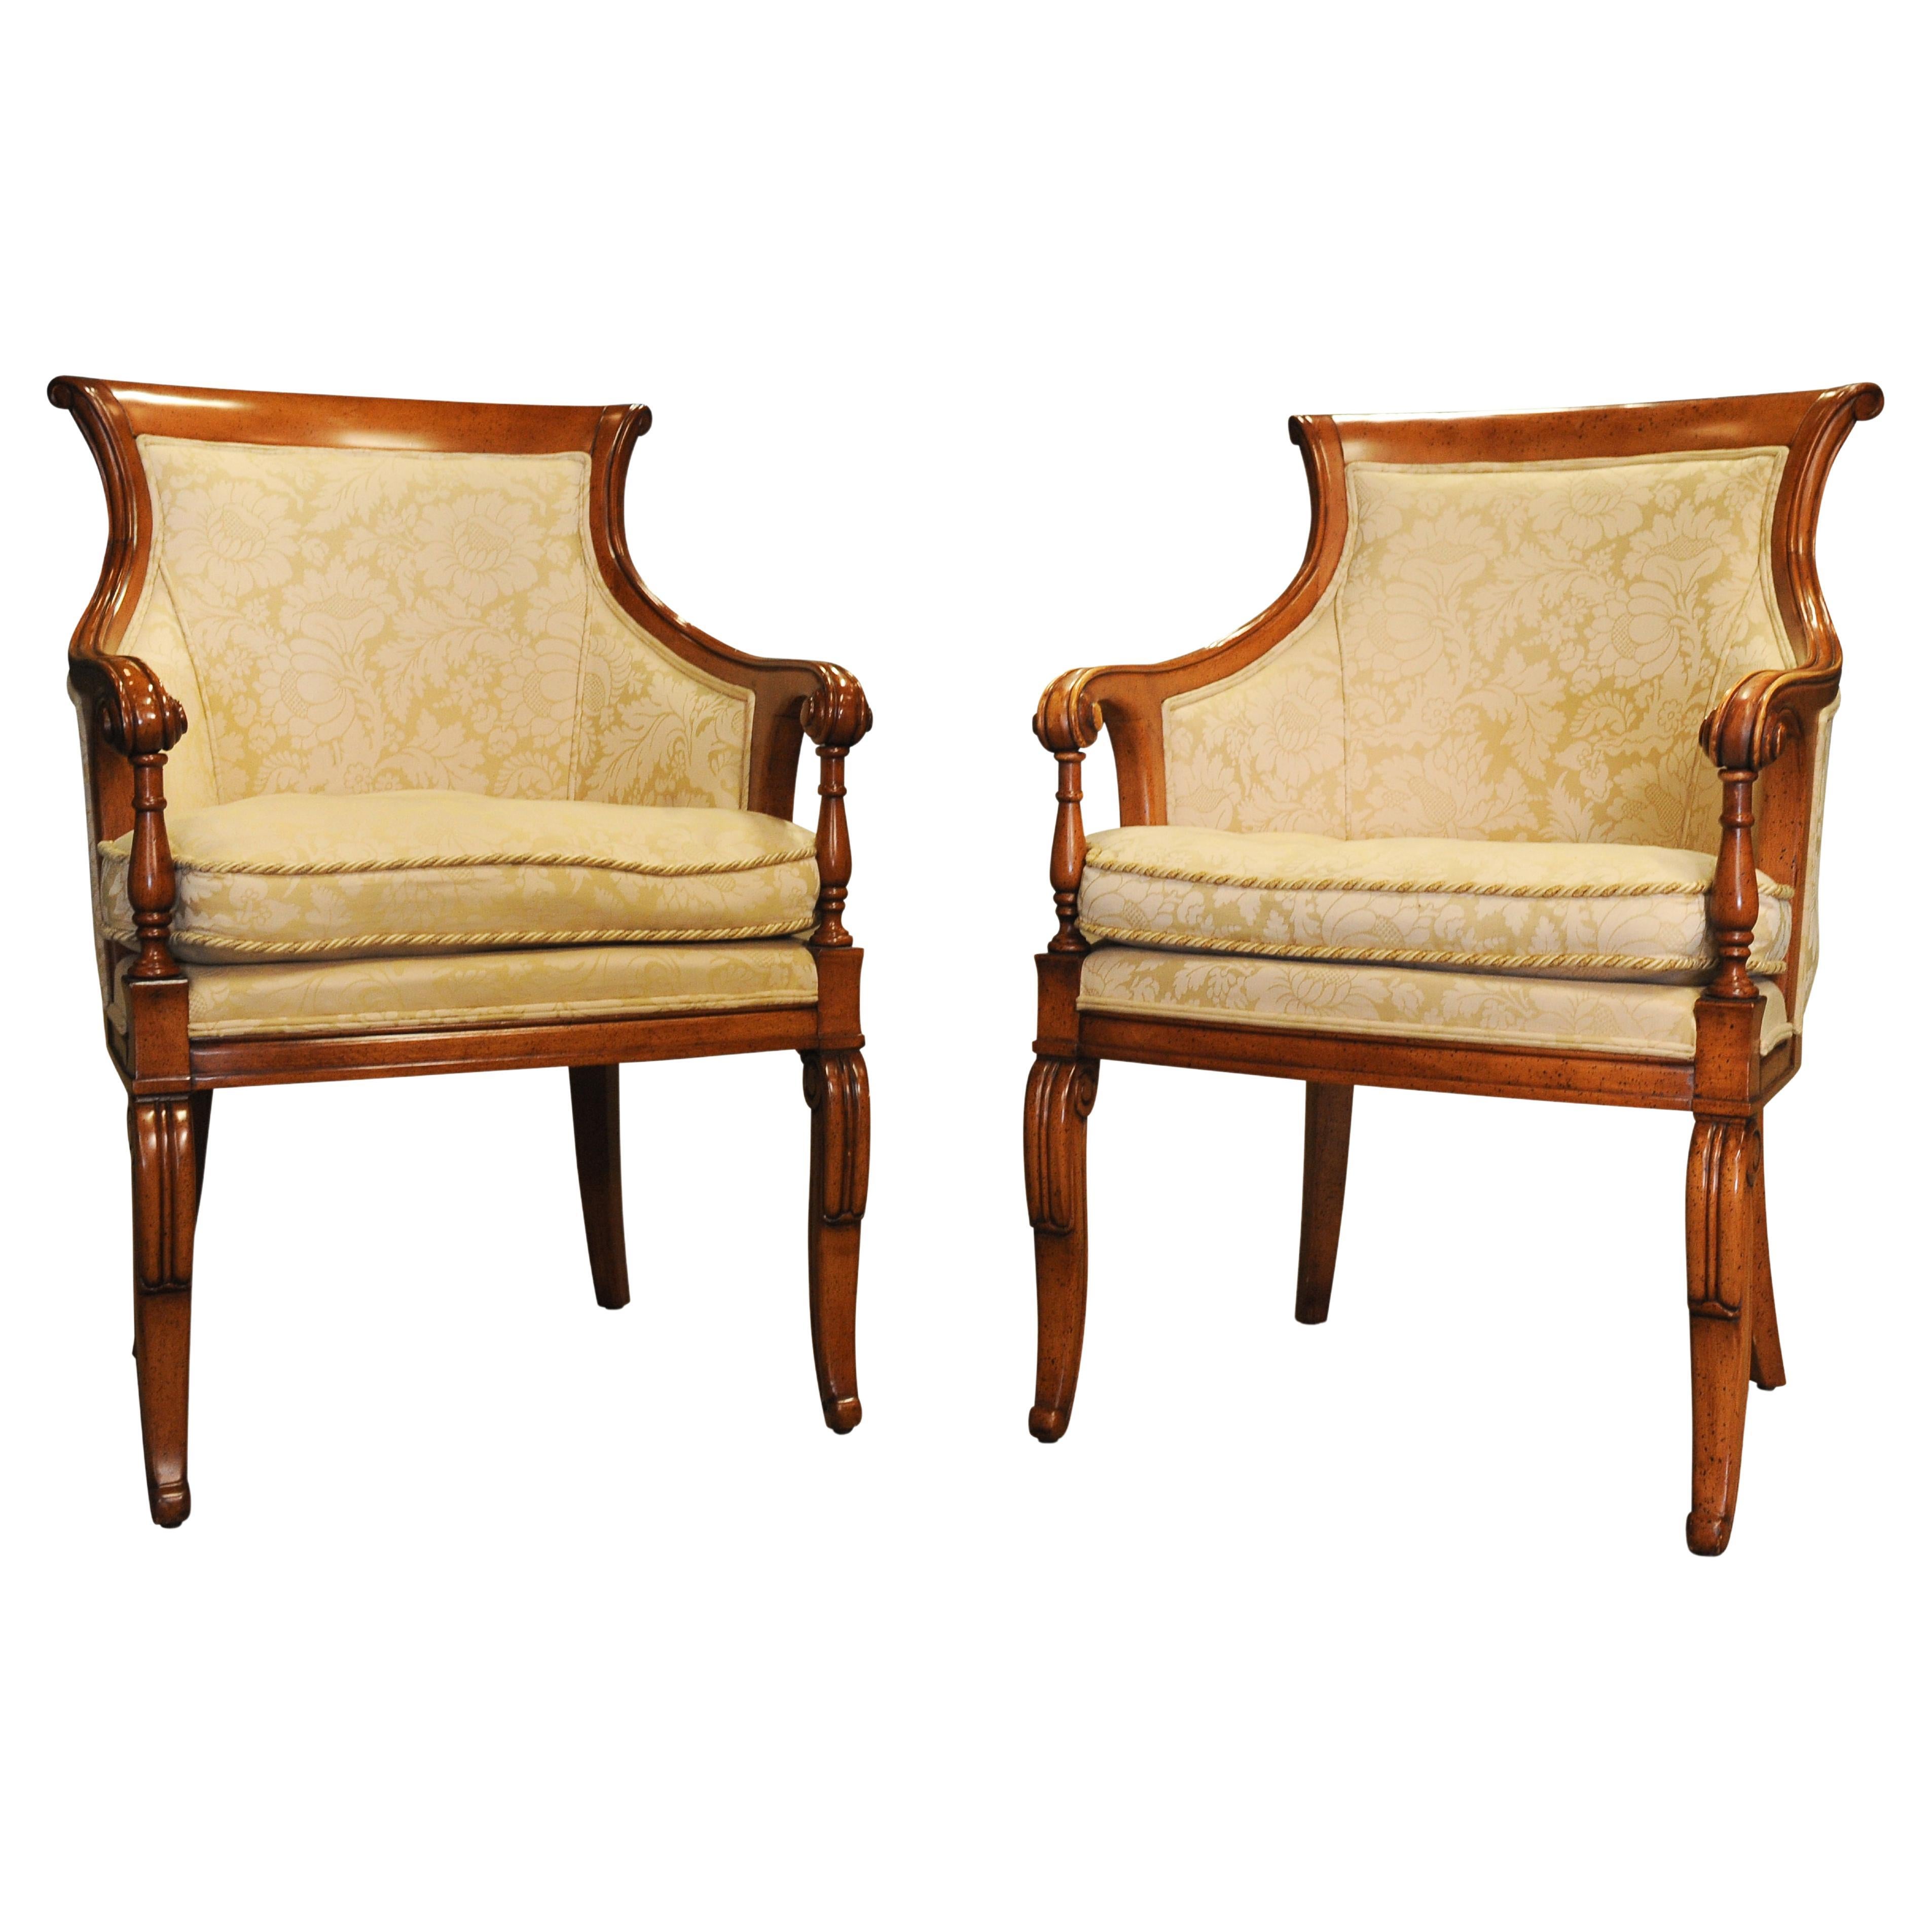 Elegant Pair of William IV Design Bergere Armchairs With Cream Damask Upholstery For Sale